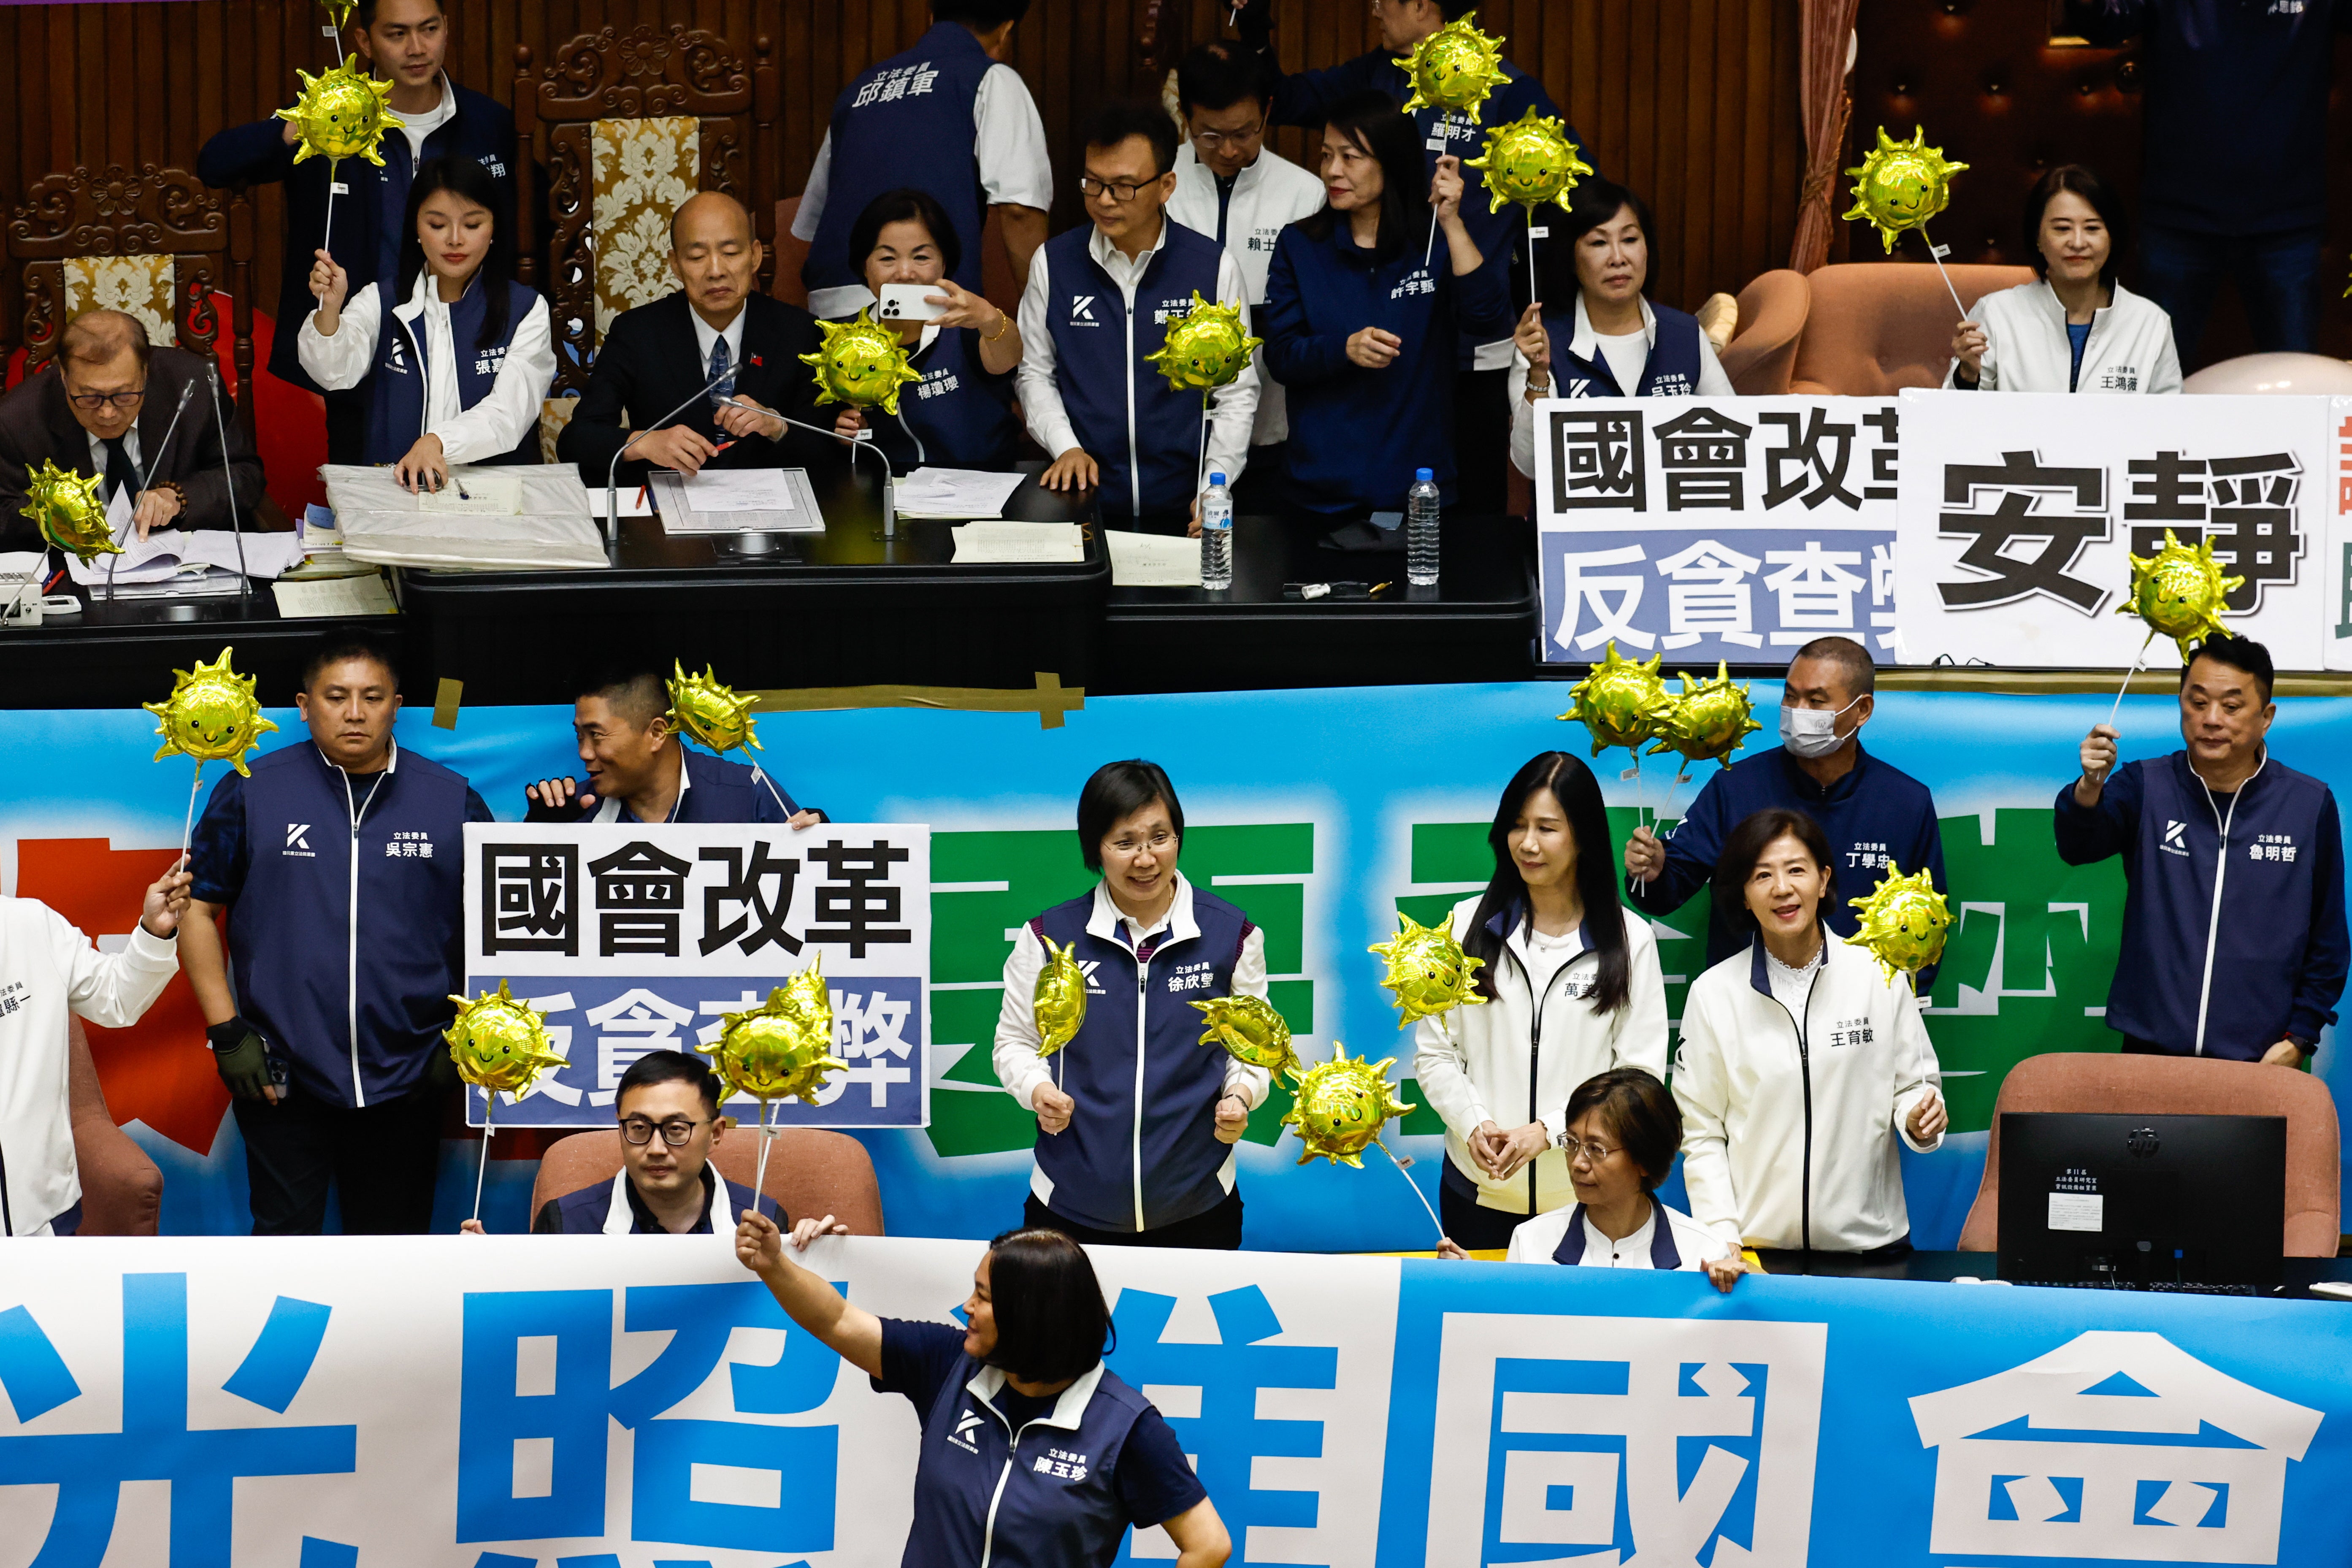 Taiwanese lawmakers of the Kuomintang (KMT) holding props stand near the Parliament President Han Kuo-yu to prevent the Democratic Progressive Party’s legislators from approaching, at the chamber inside the Legislative Yua